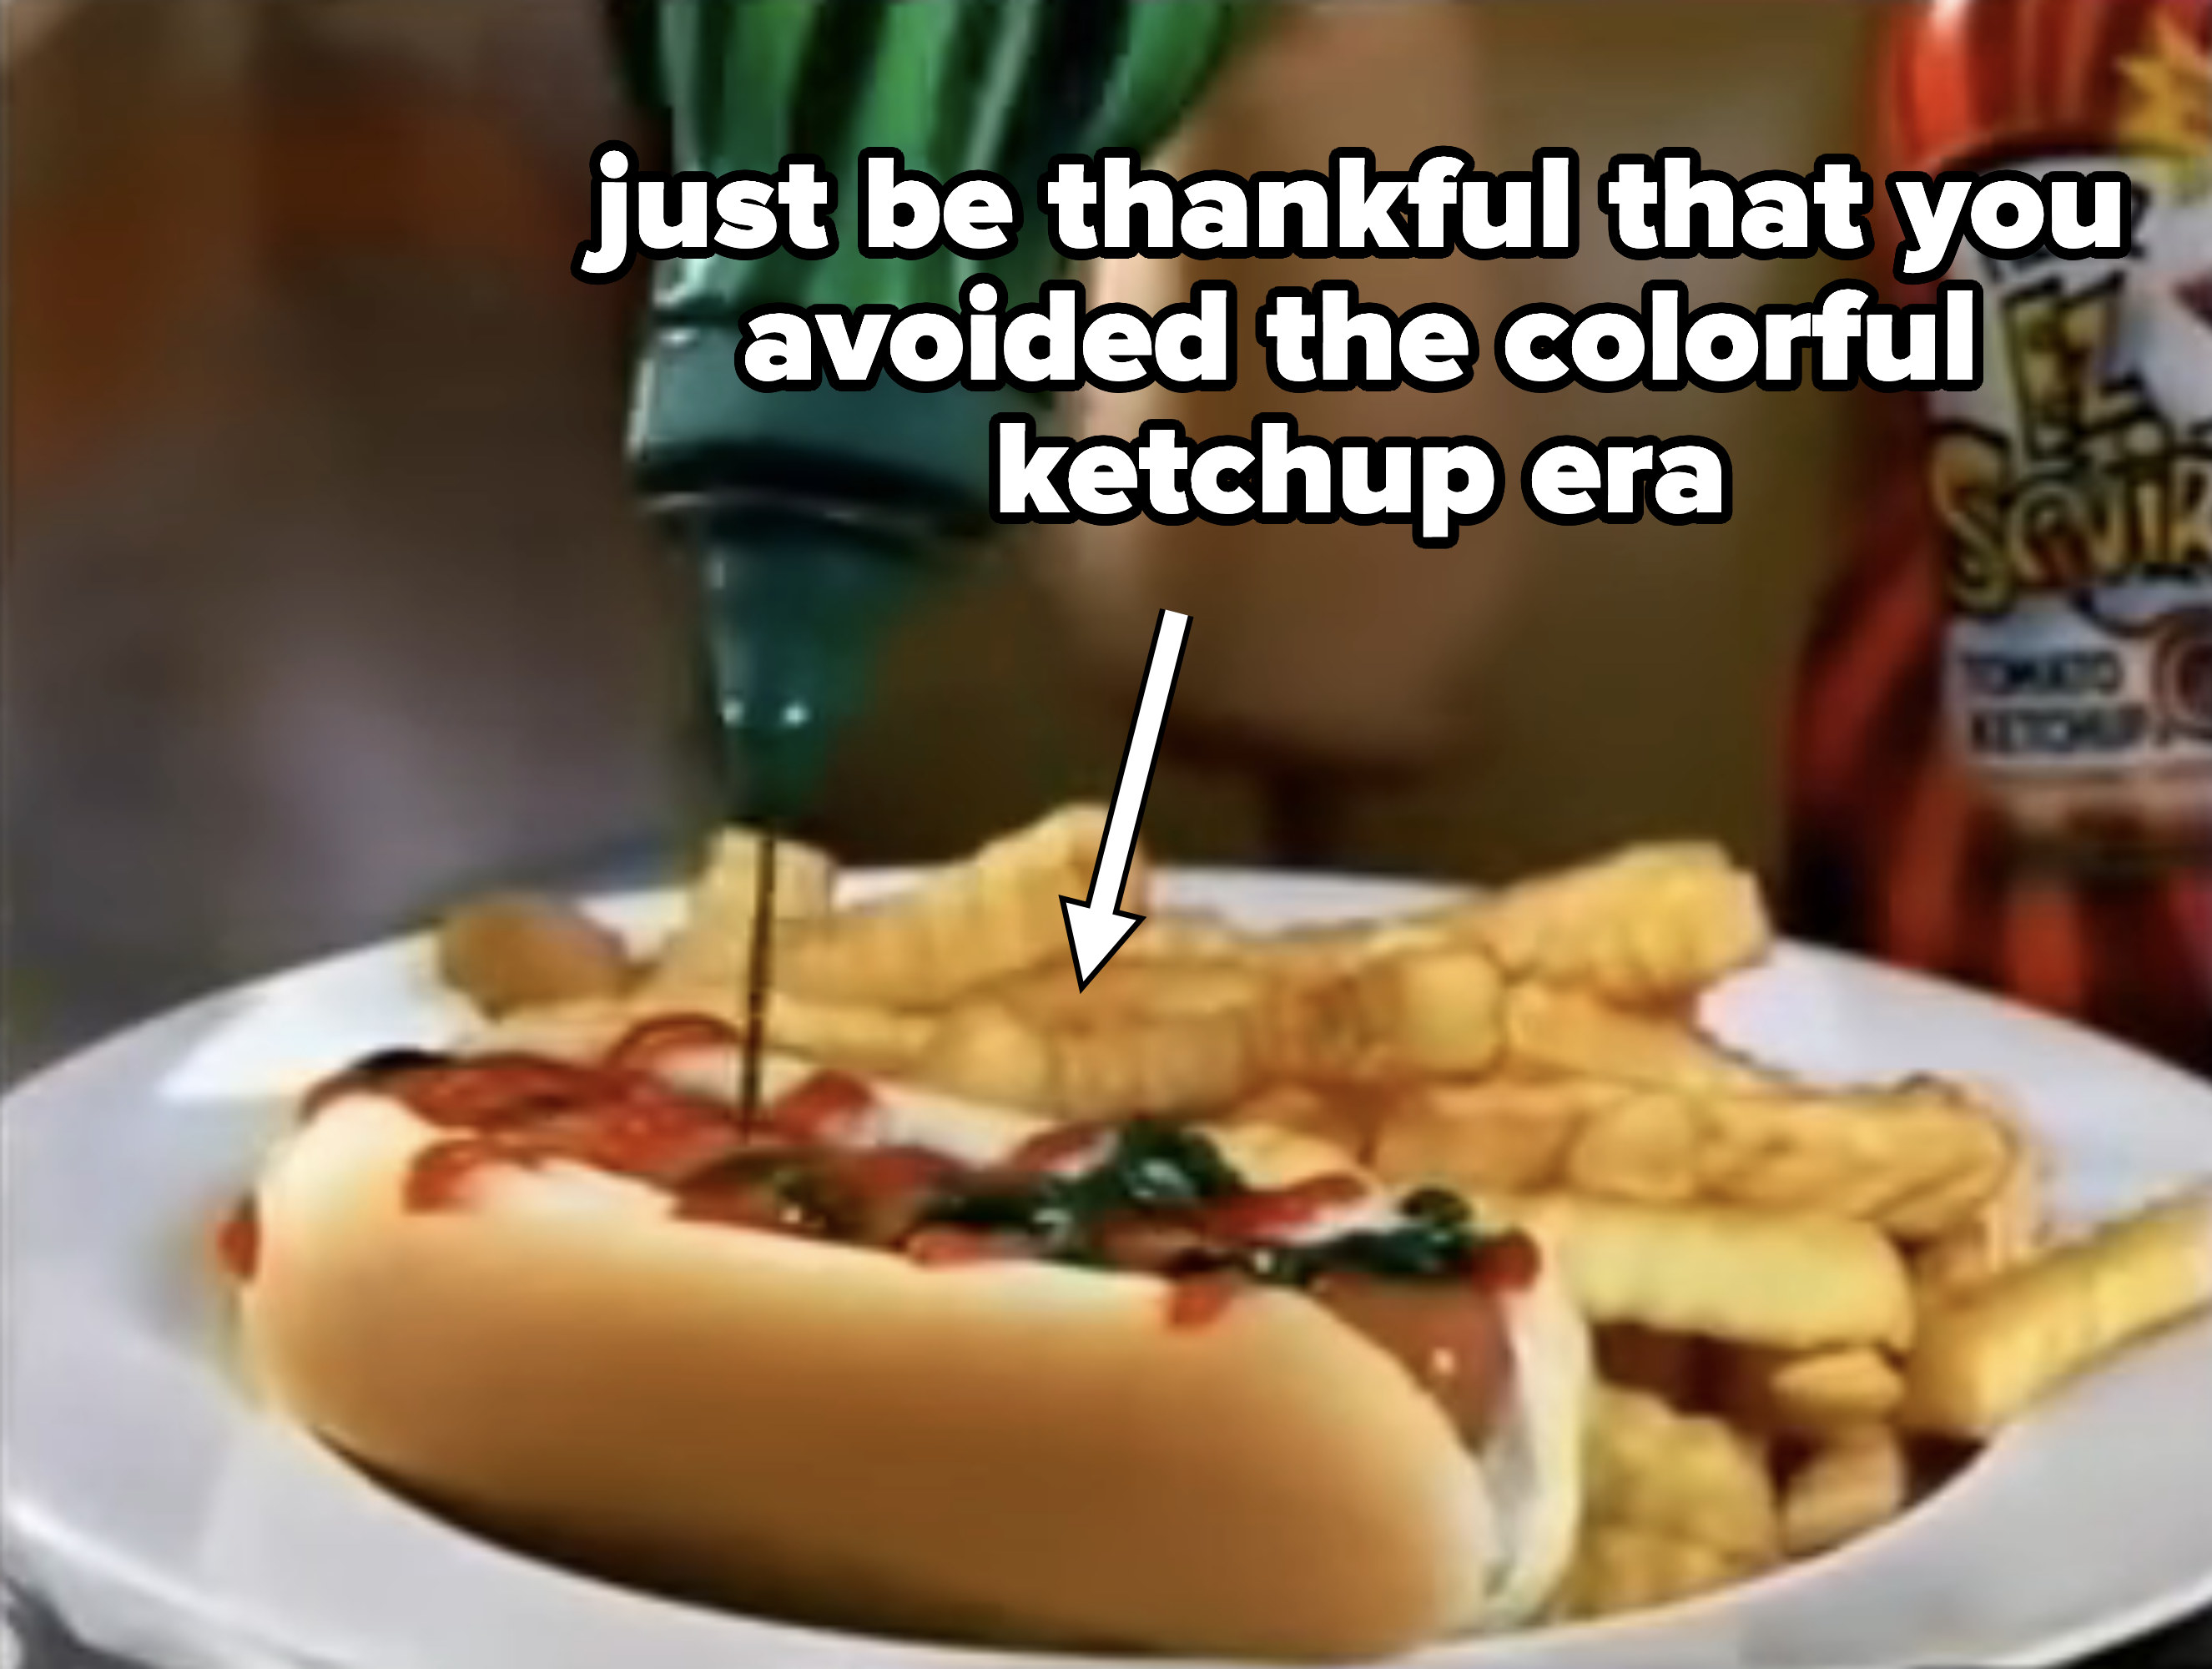 A bottle of green Heinz EZ Squirt ketchup being squirted on a hot dog